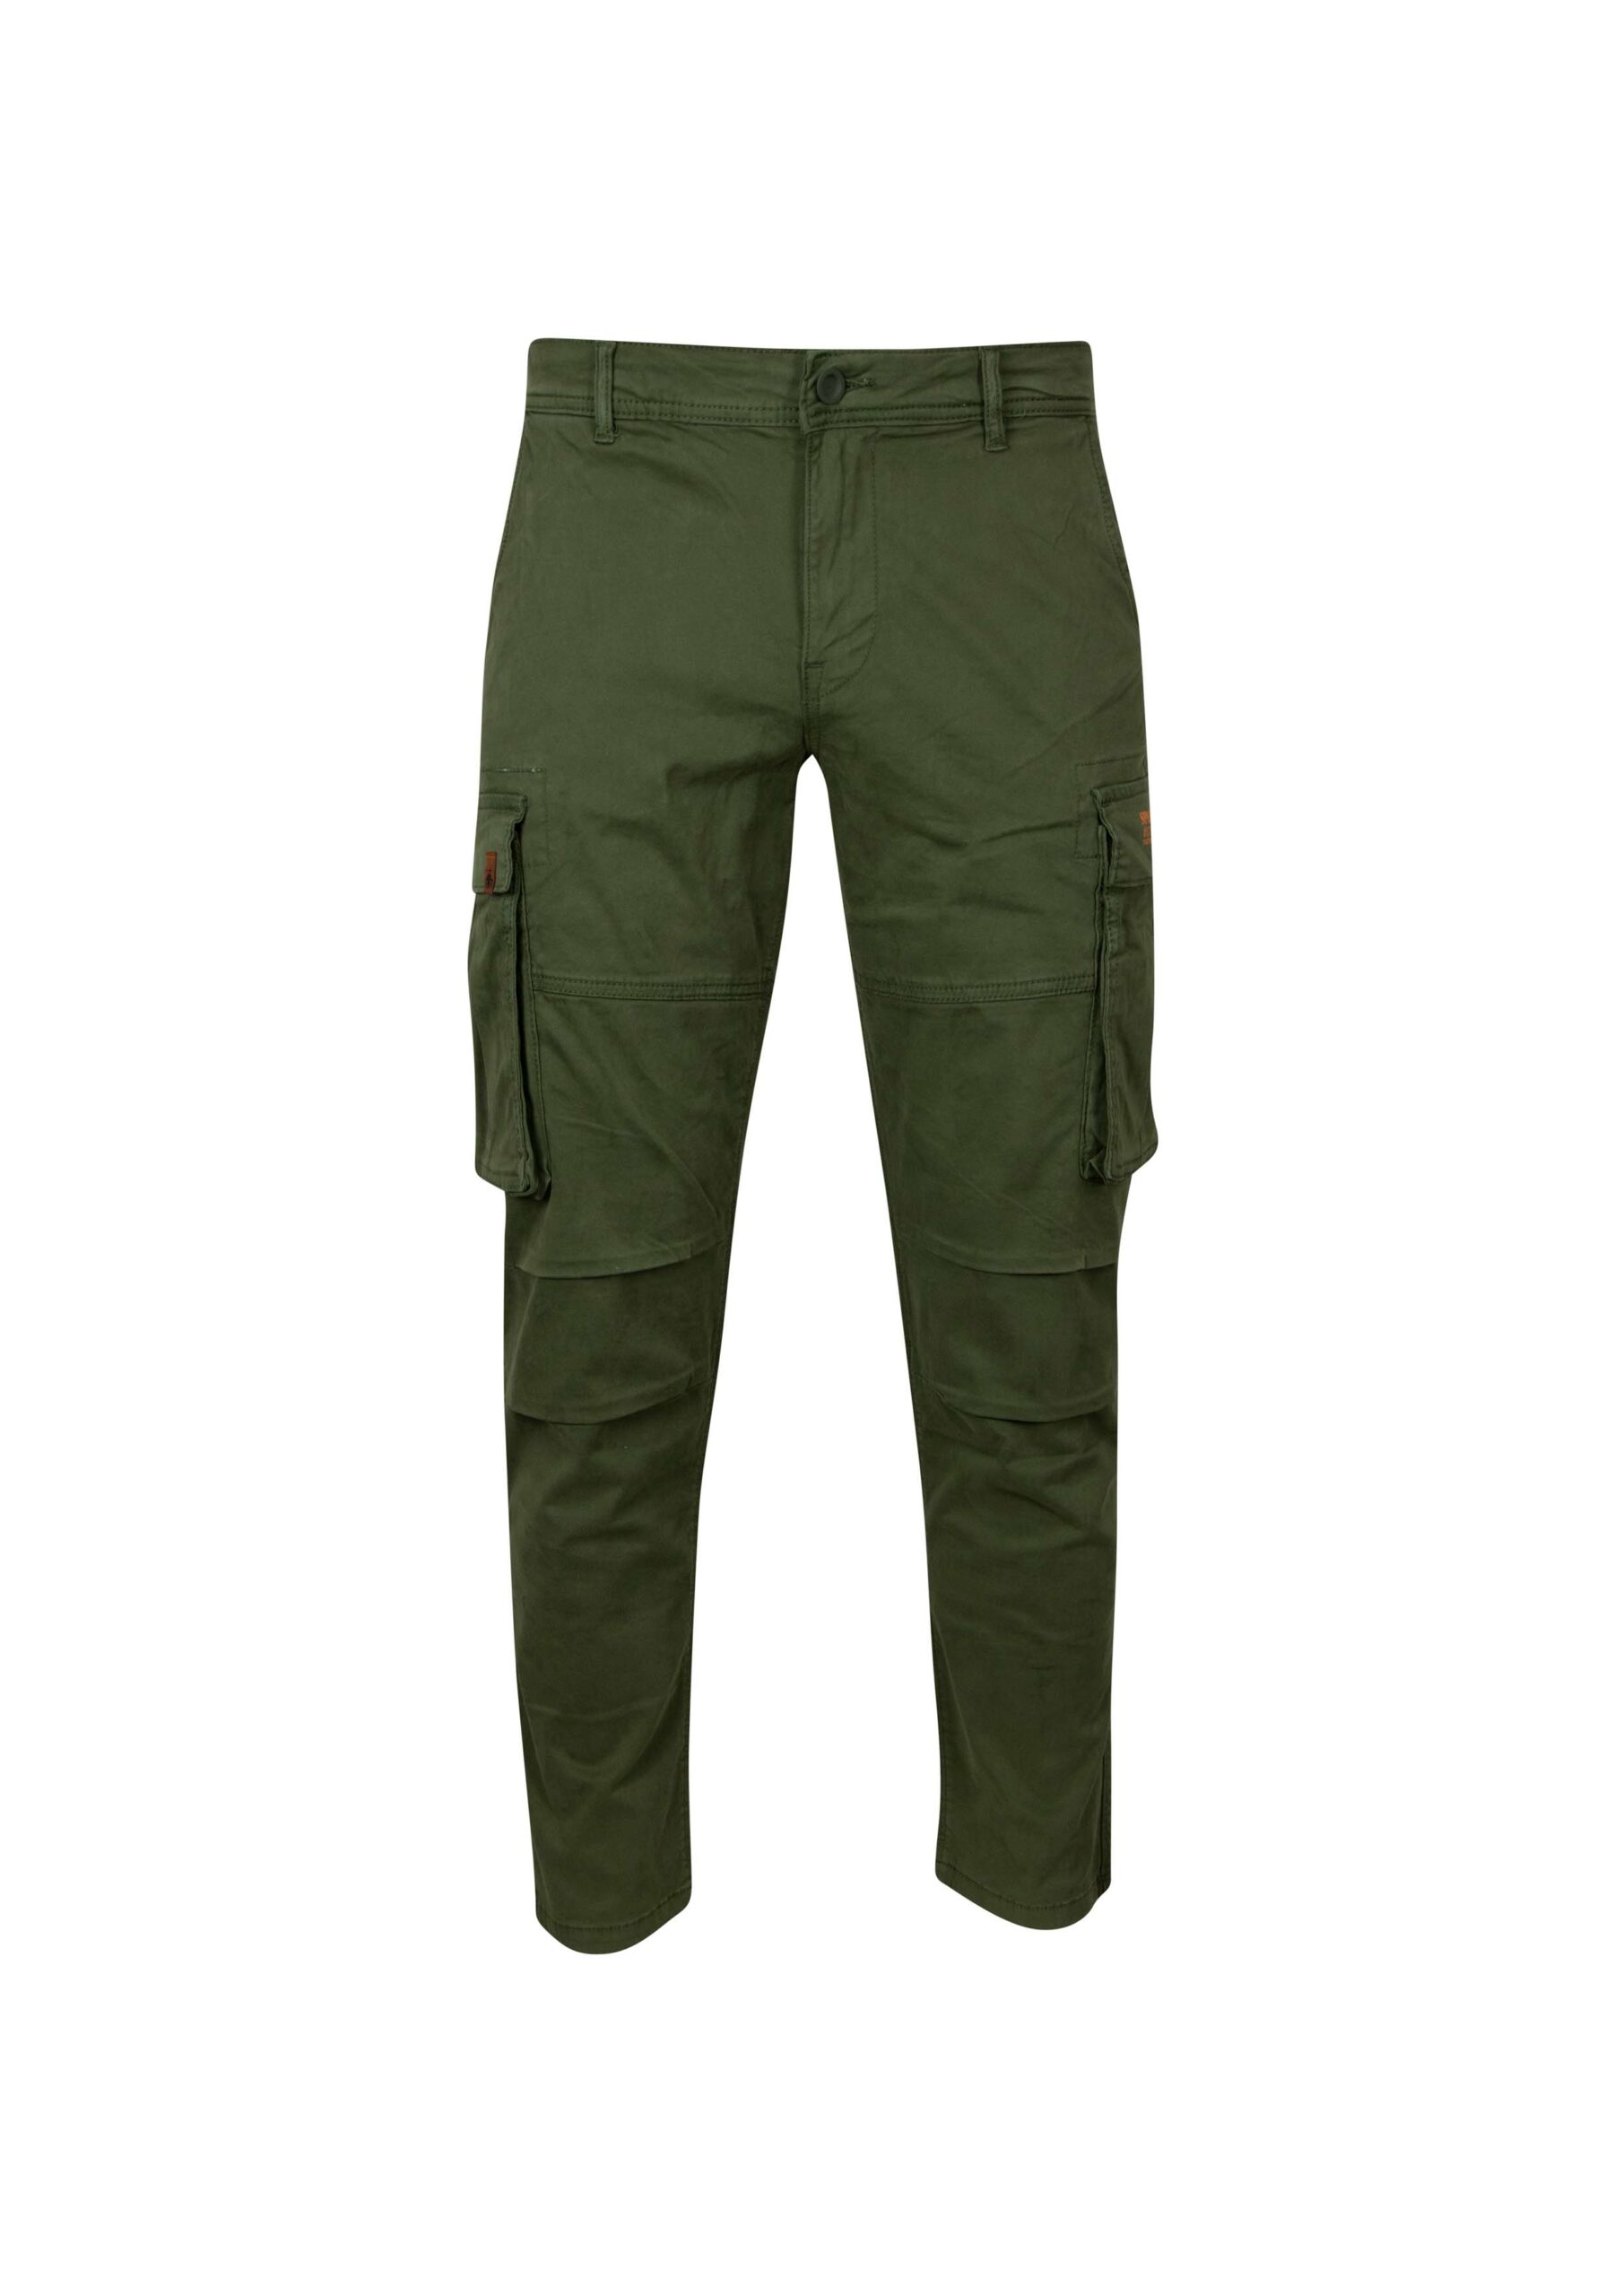 Mens Cargo Pant - Artisan Outfitters Ltd